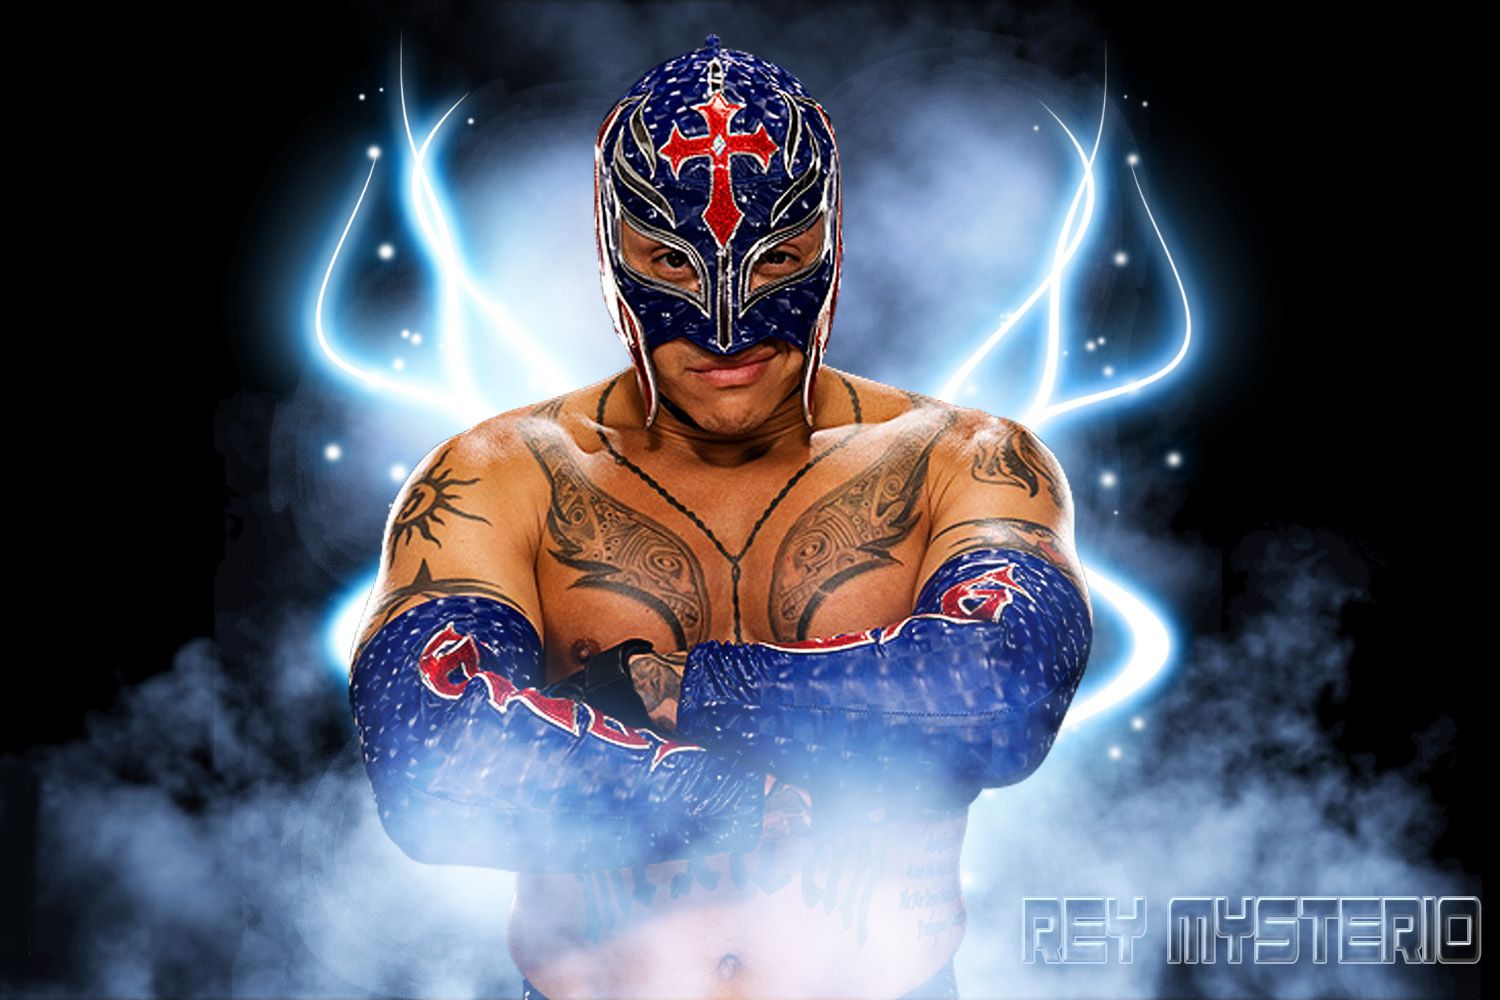 Wwe Kalisto HD Wallpaper Amp Pictures Live